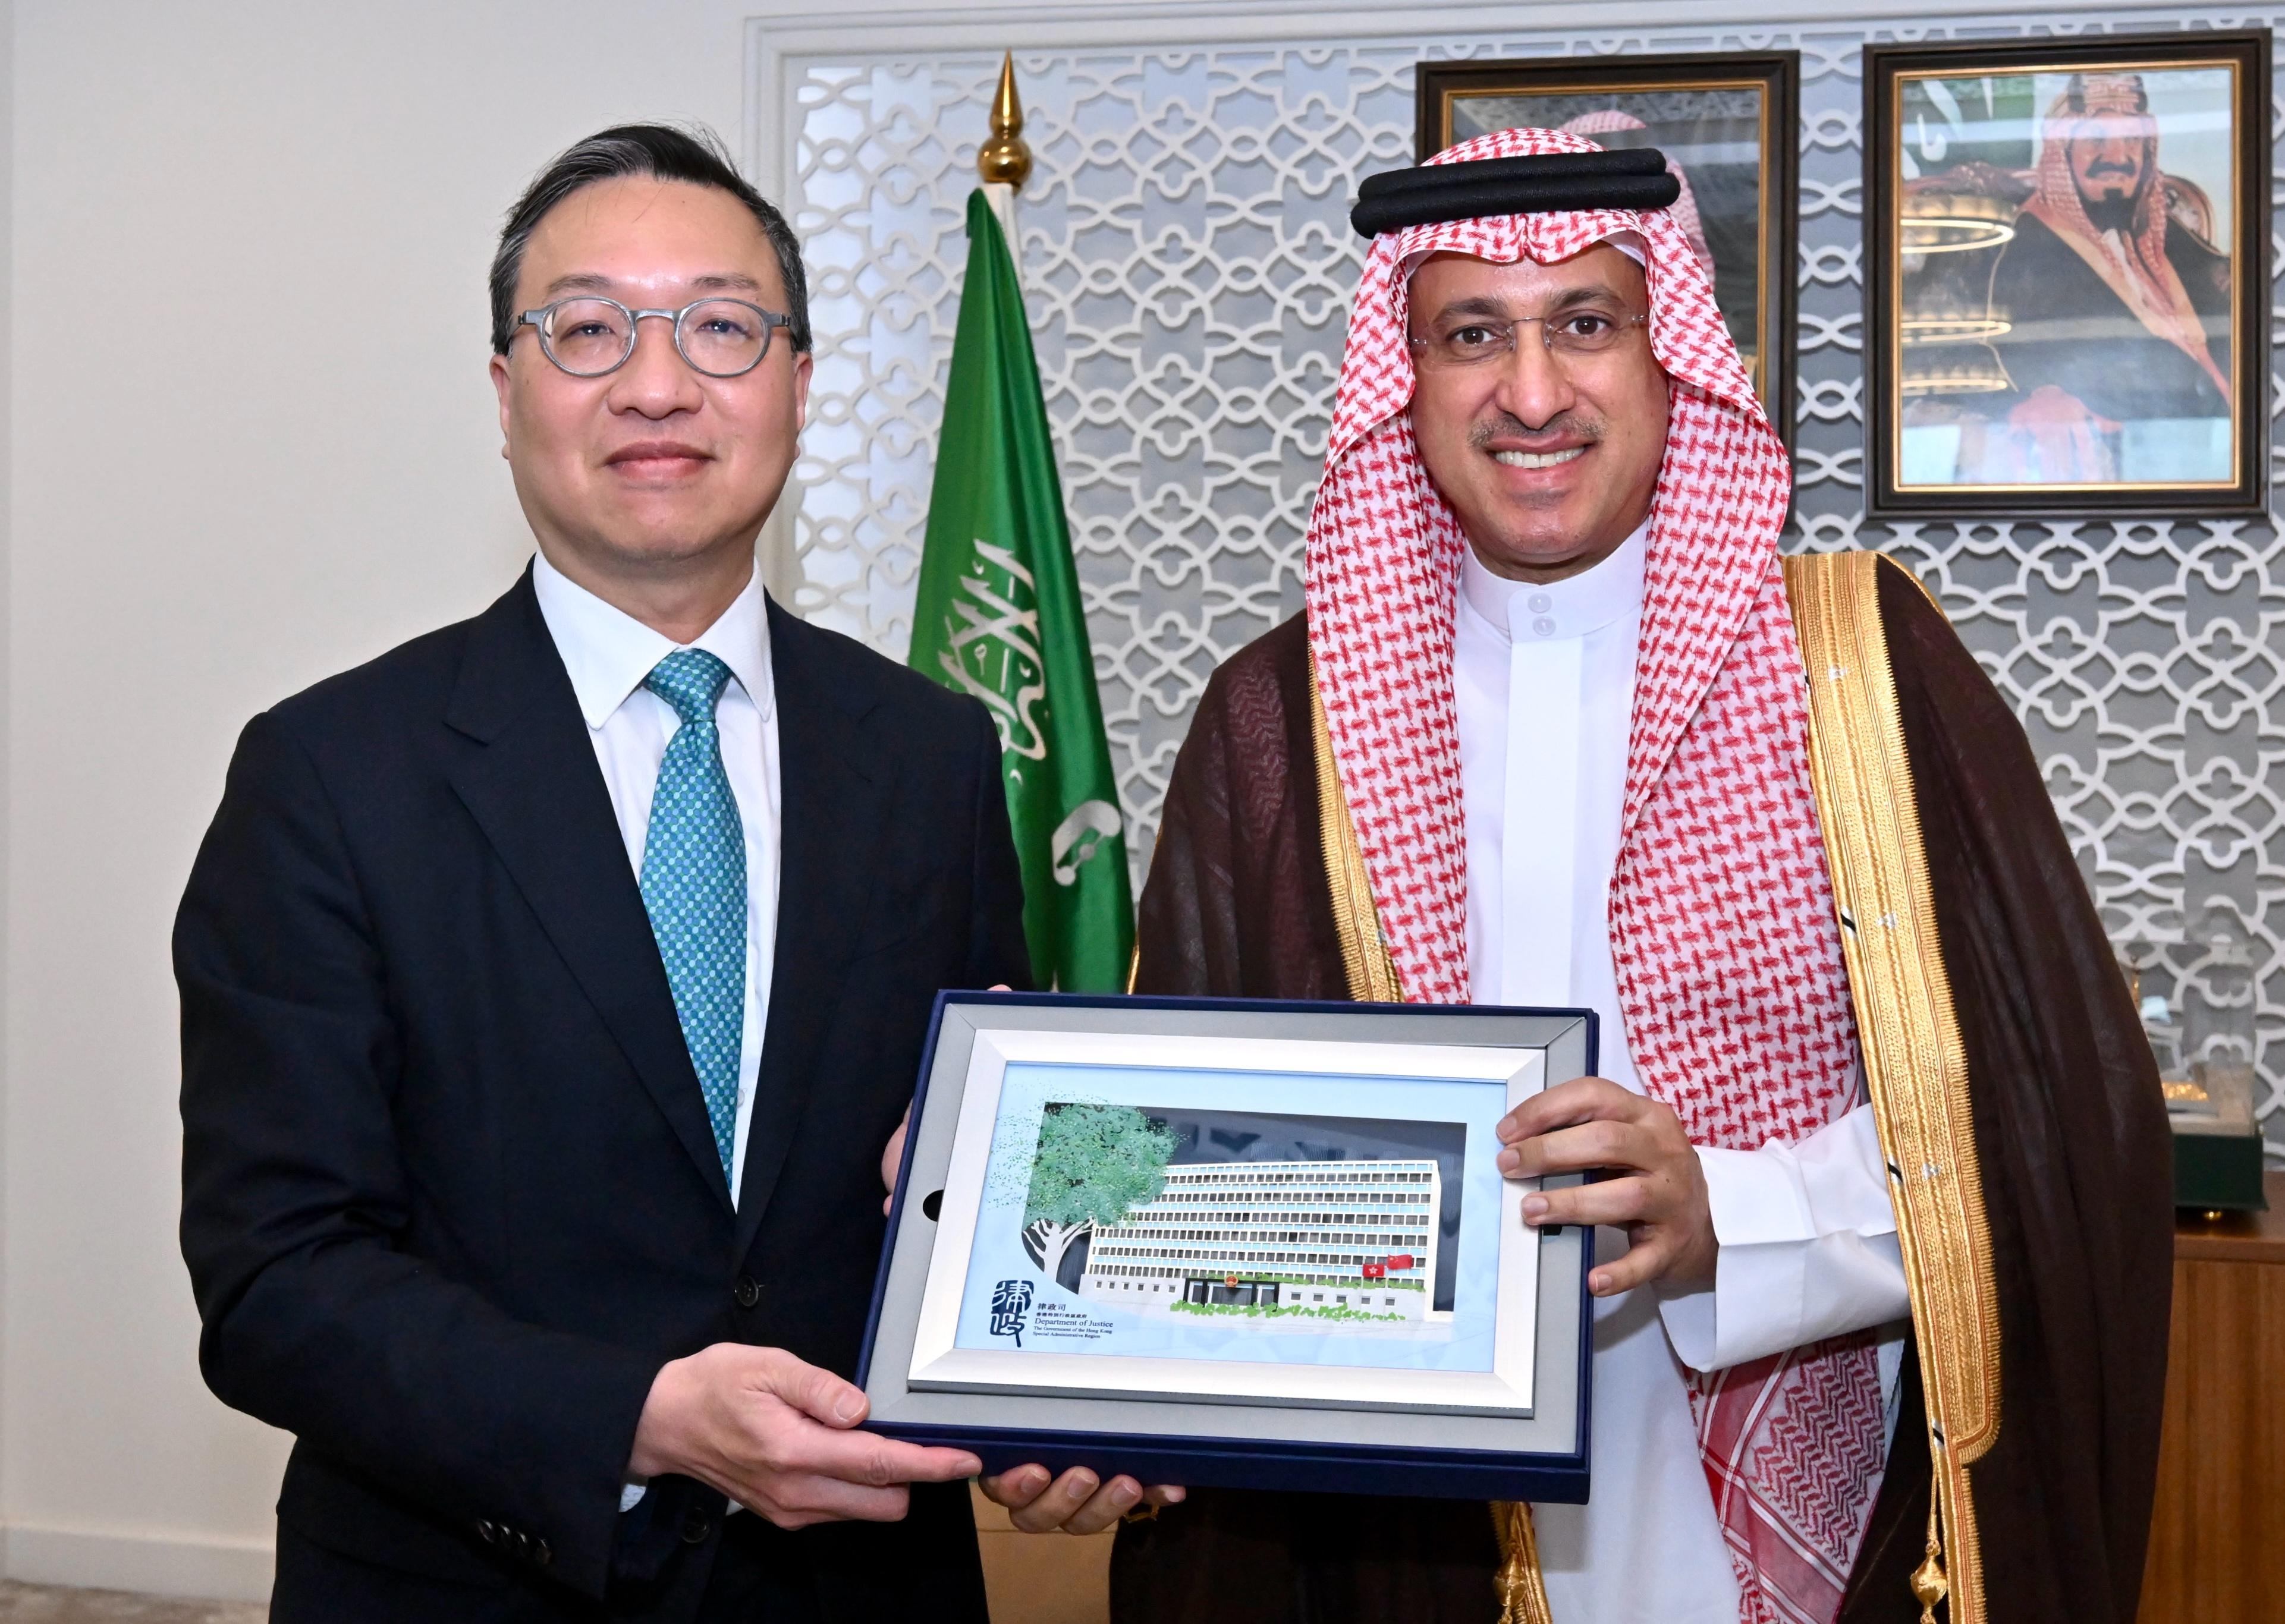 The Secretary for Justice, Mr Paul Lam, SC, continued his visit to Riyadh, Saudi Arabia, today (May 20, Riyadh time) with his about 30-person delegation, comprising representatives from the Law Society of Hong Kong, the Hong Kong Bar Association, the Hong Kong Exchanges and Clearing Limited, Invest Hong Kong and related sectors. Photo shows Mr Lam (left) presenting a souvenir to the Vice-Minister of Justice of the Kingdom of Saudi Arabia, Dr Najem bin Abdullah al-Zaid (right), after their meeting this morning.
